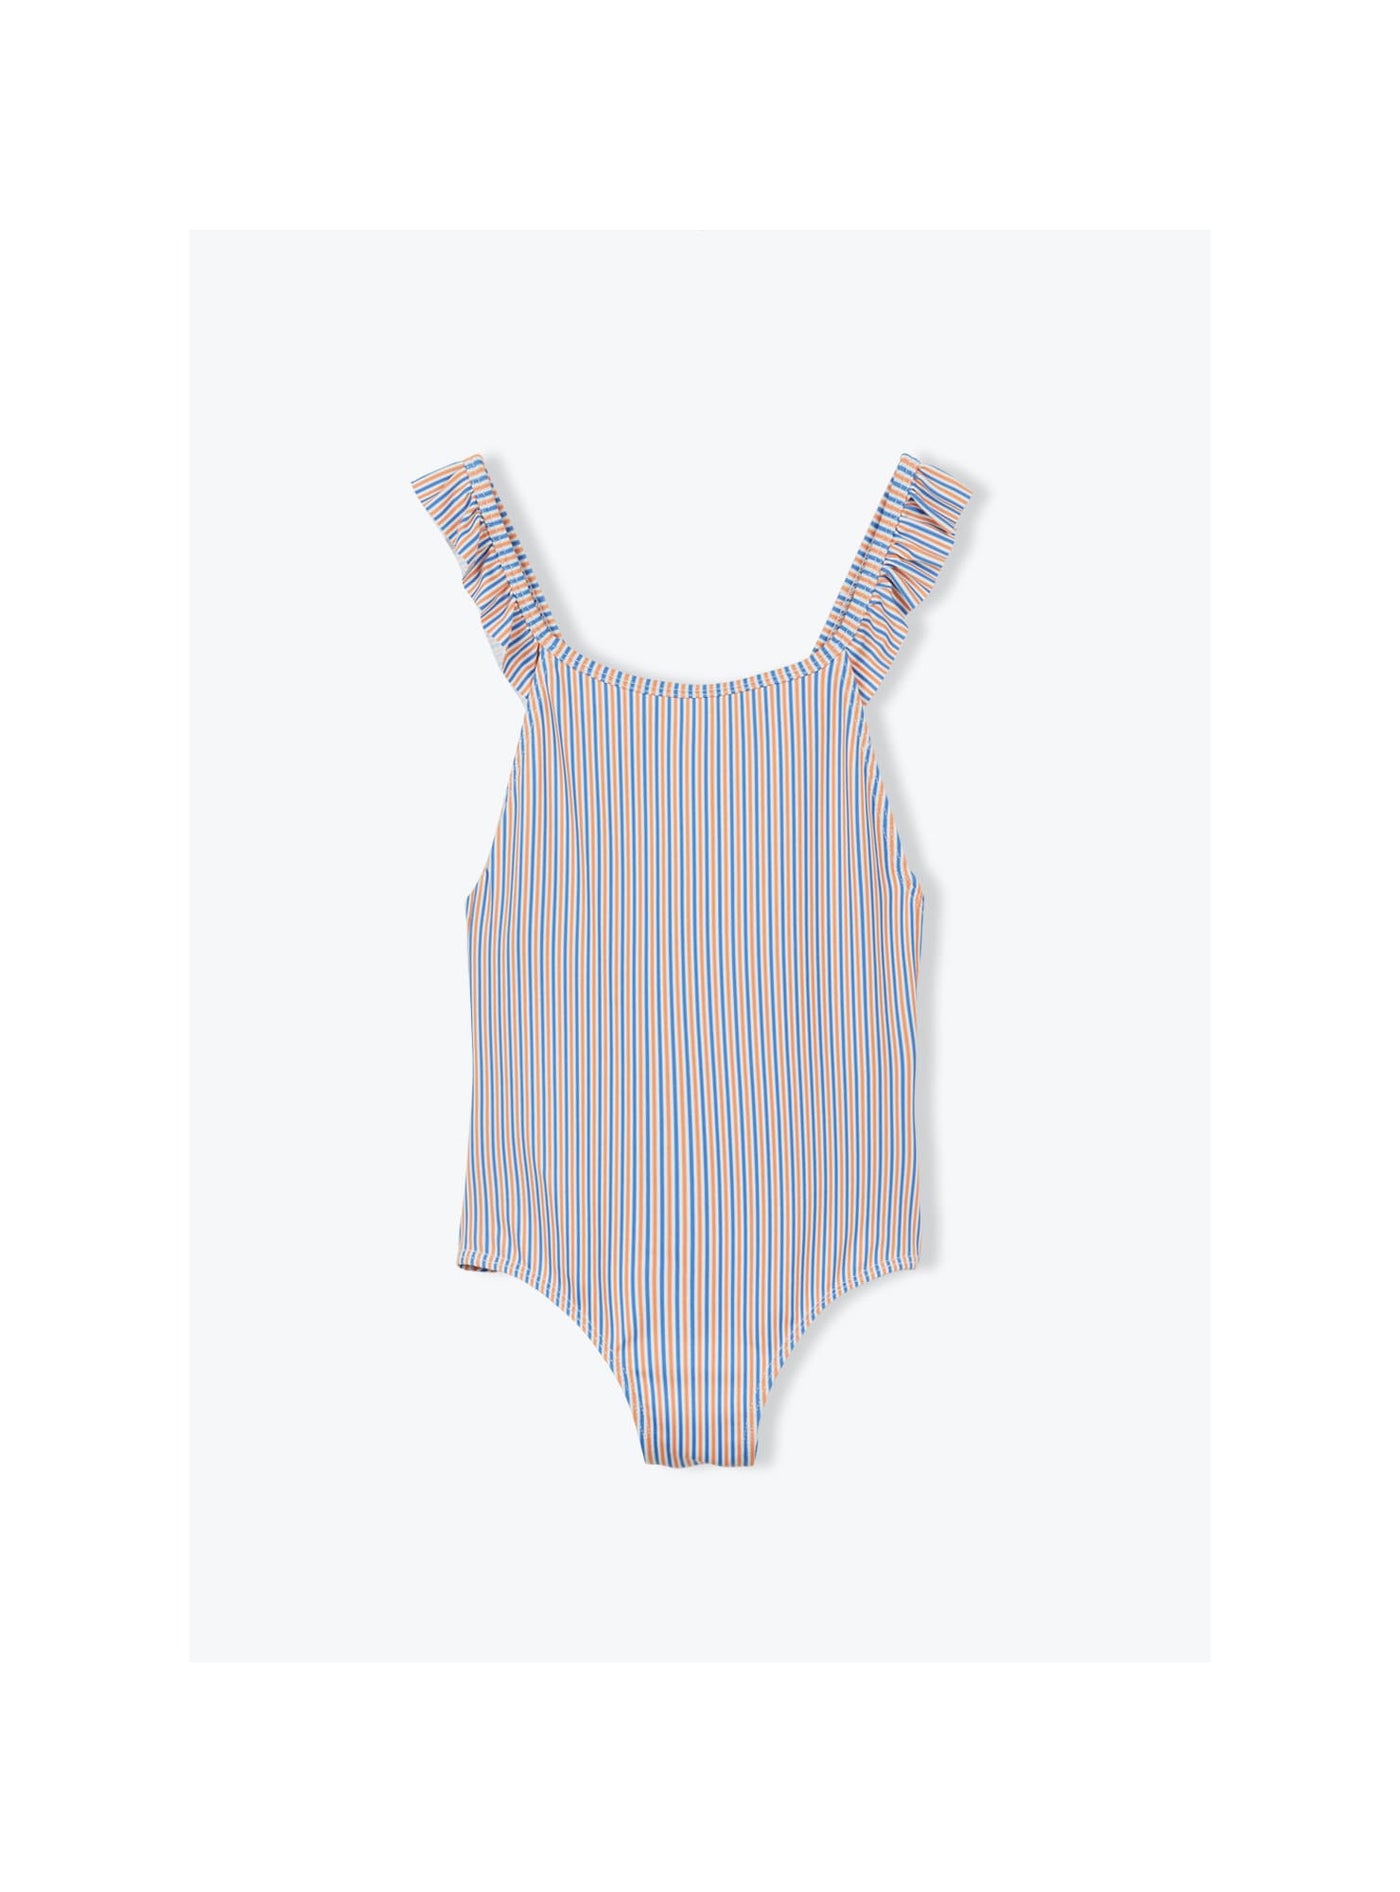 Striped Swimsuit